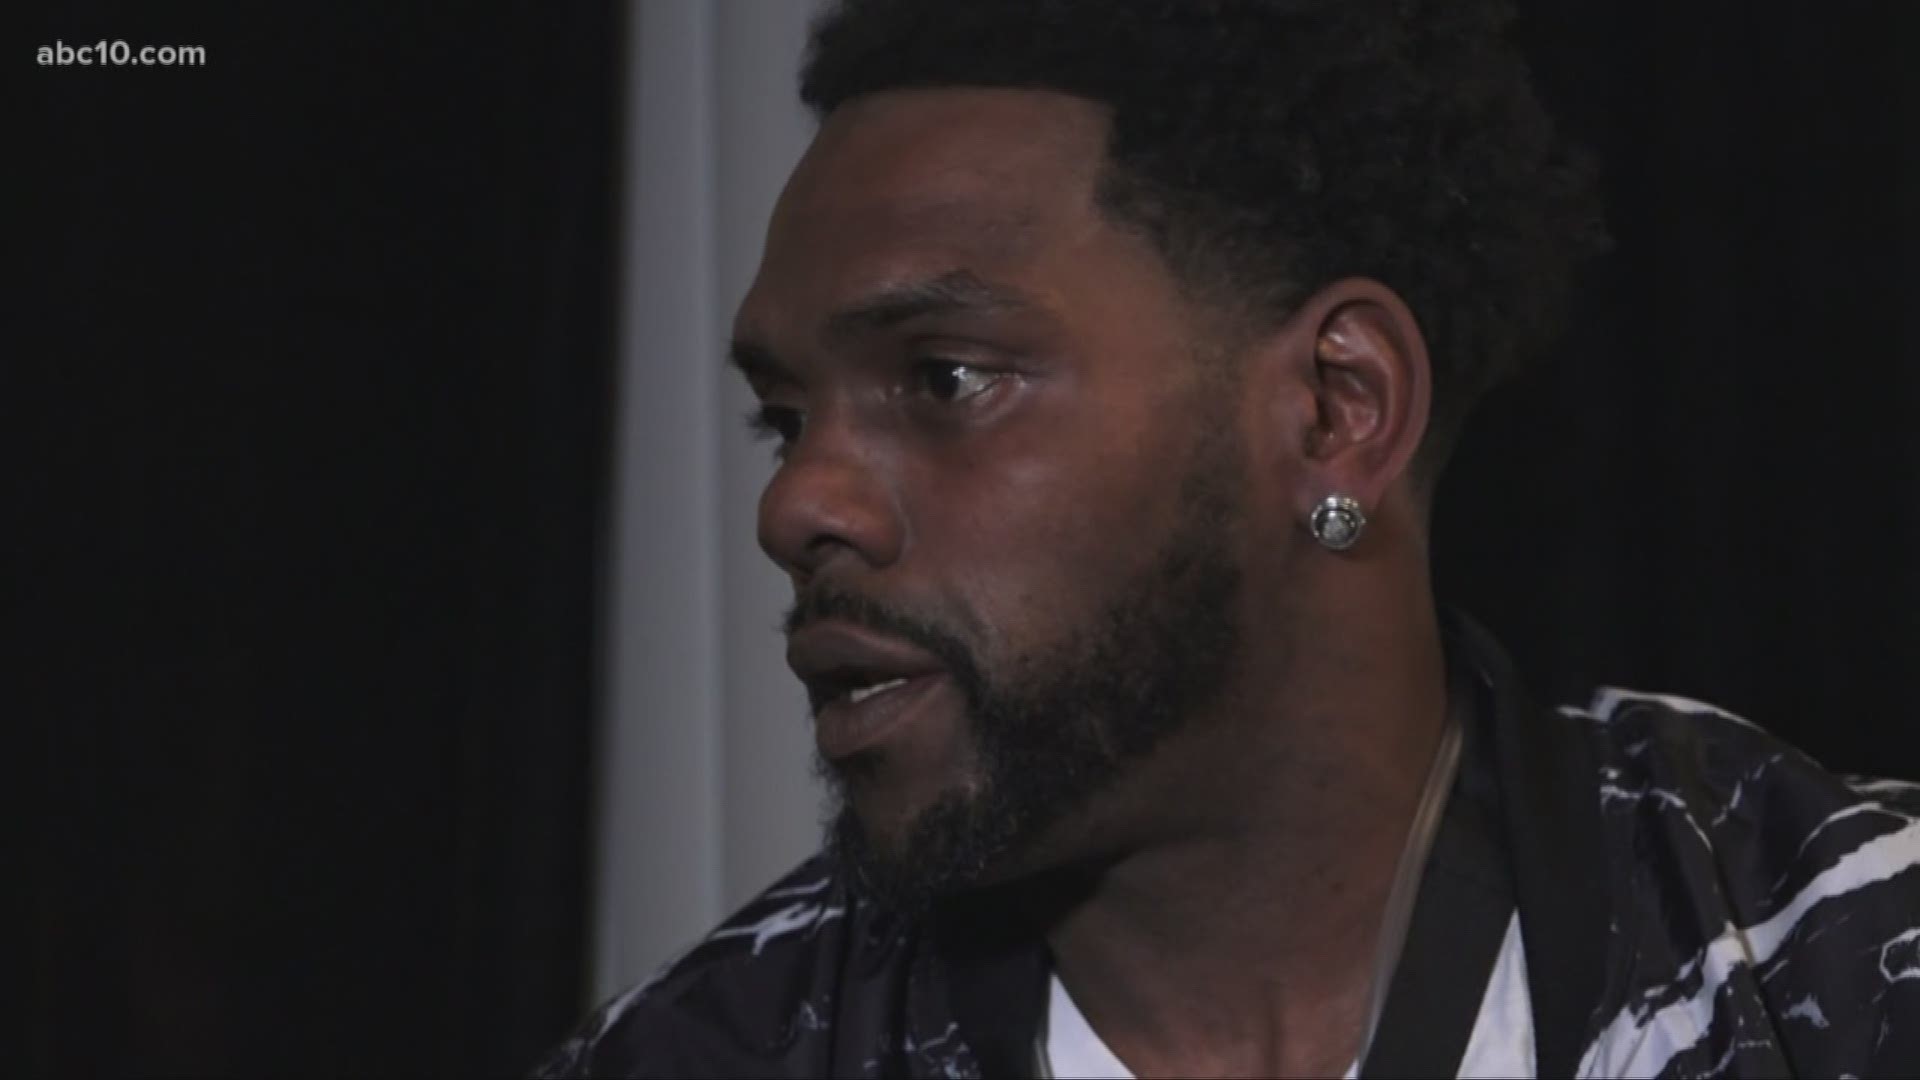 Rapper Keak Da Sneak, whose real name is Charles Williams, is hoping for an alternative sentence, since he is bound to a wheelchair after being shot several times while leaving his show in Oakland in 2017. He pleaded no contest to felony possession of a firearm after he was caught with a stolen gun in 2017.